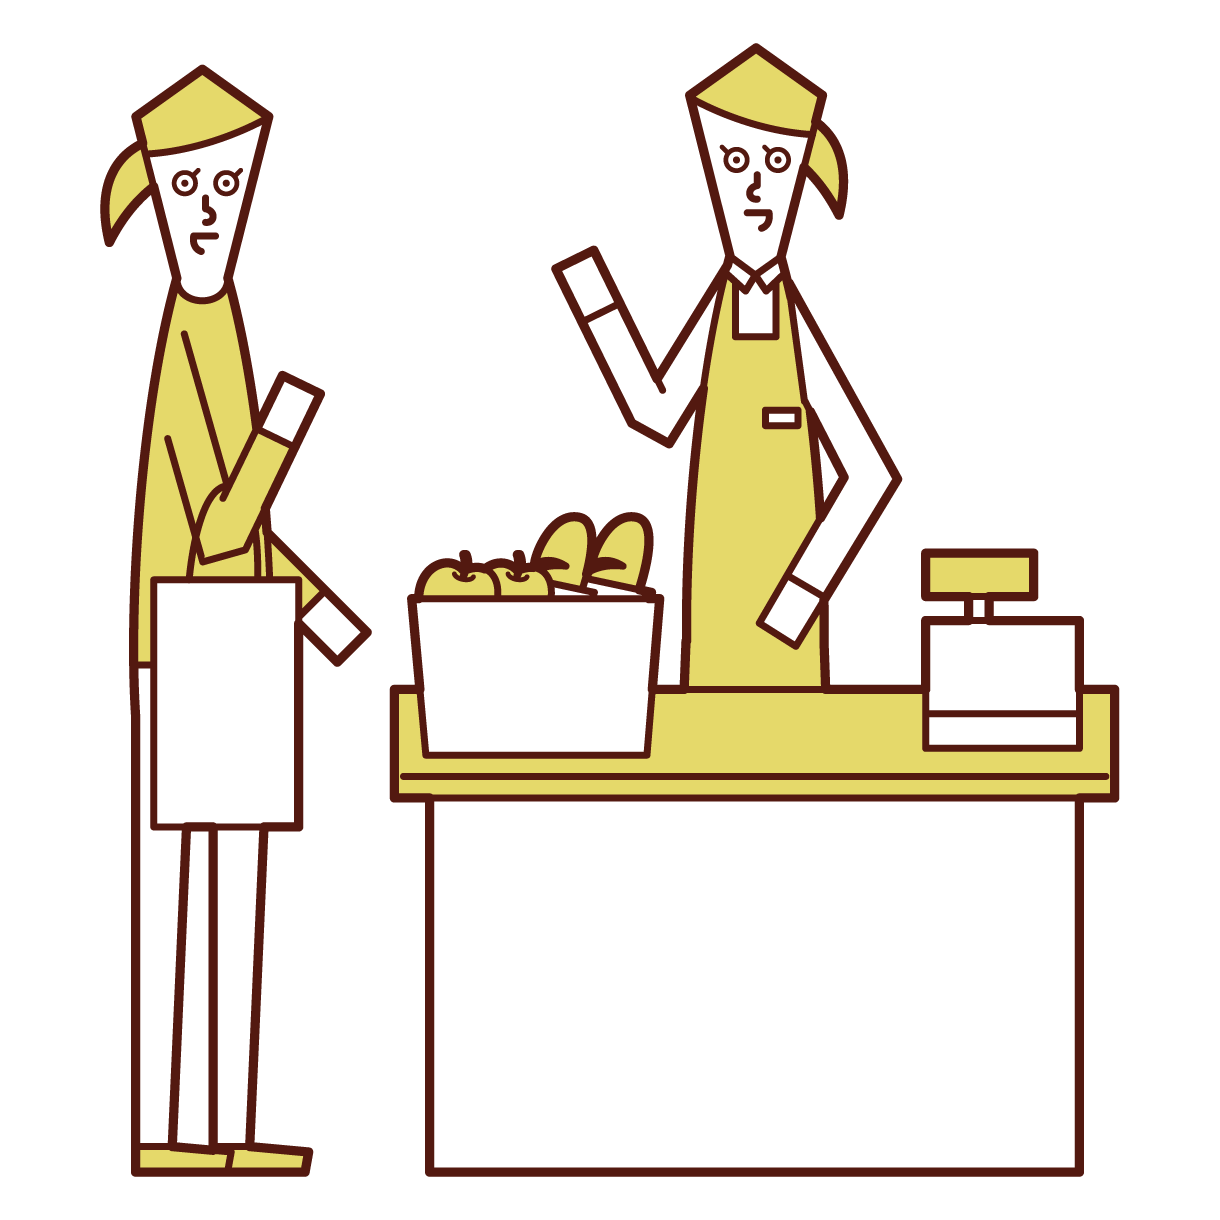 Illustration of a clerk (woman) accounting at a cash register